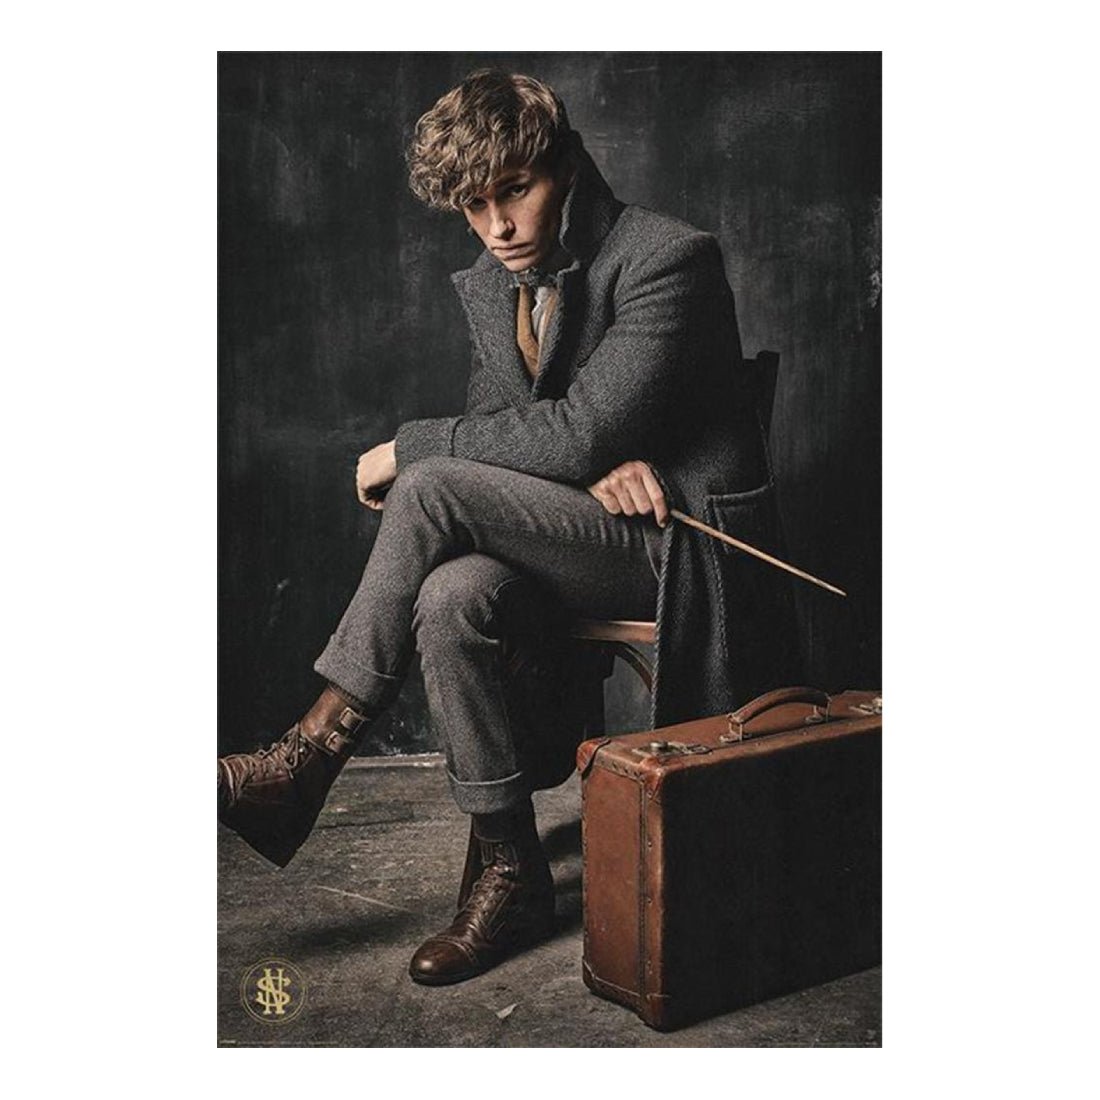 Fantastic Beasts The Crimes Of Grindelwald-newt Scamander Poster - أكسسوار - Store 974 | ستور ٩٧٤